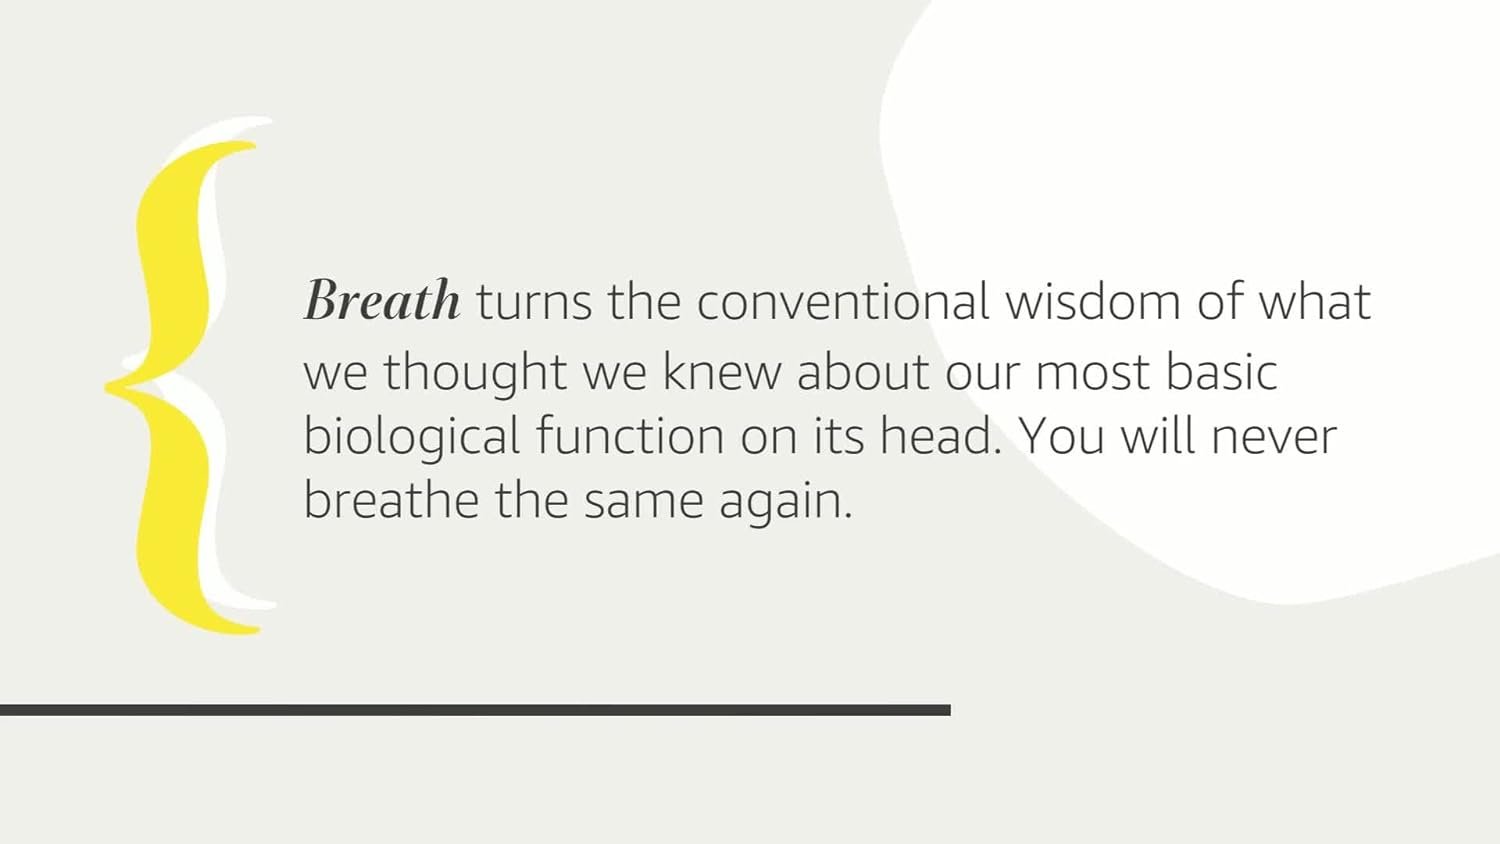 Breath: The New Science of a Lost Art     Hardcover – May 26, 2020